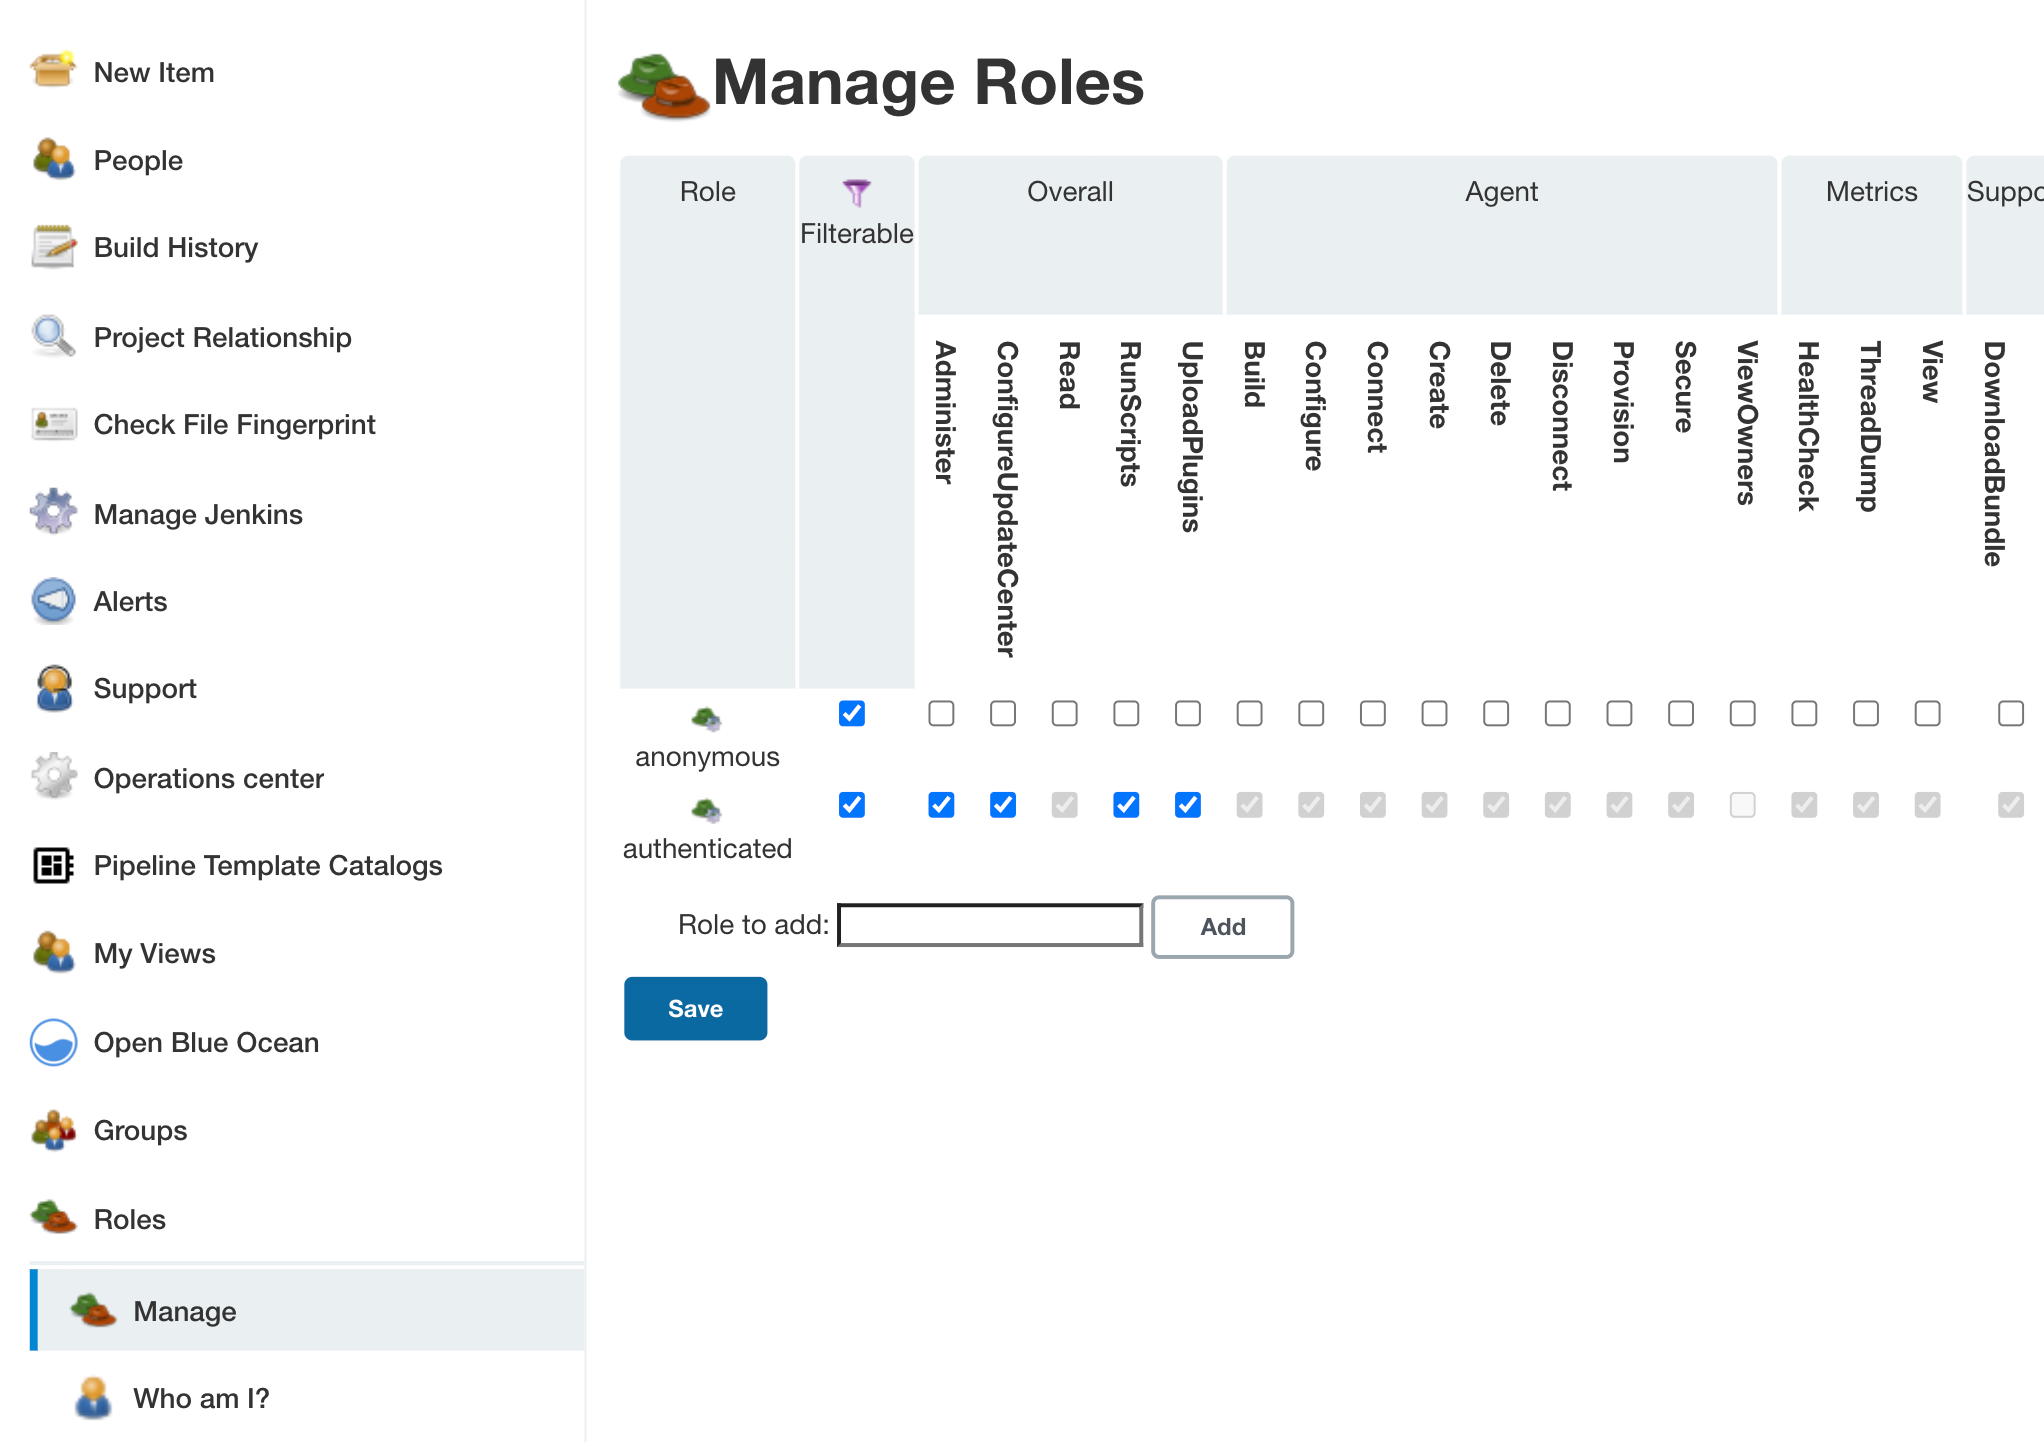 manage roles screen